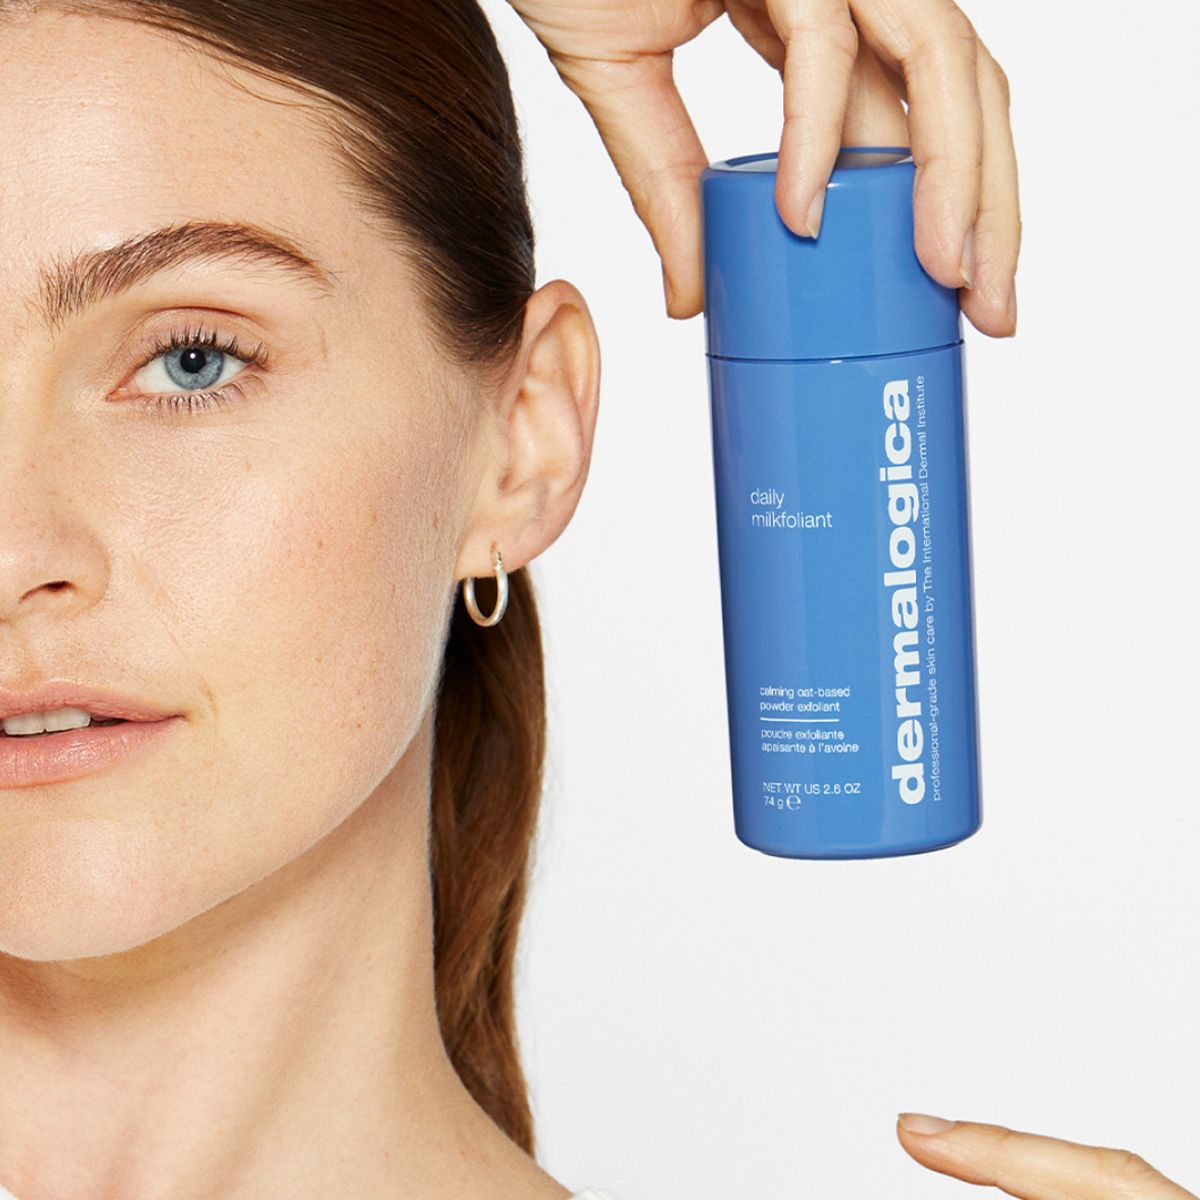 New from Dermalogica